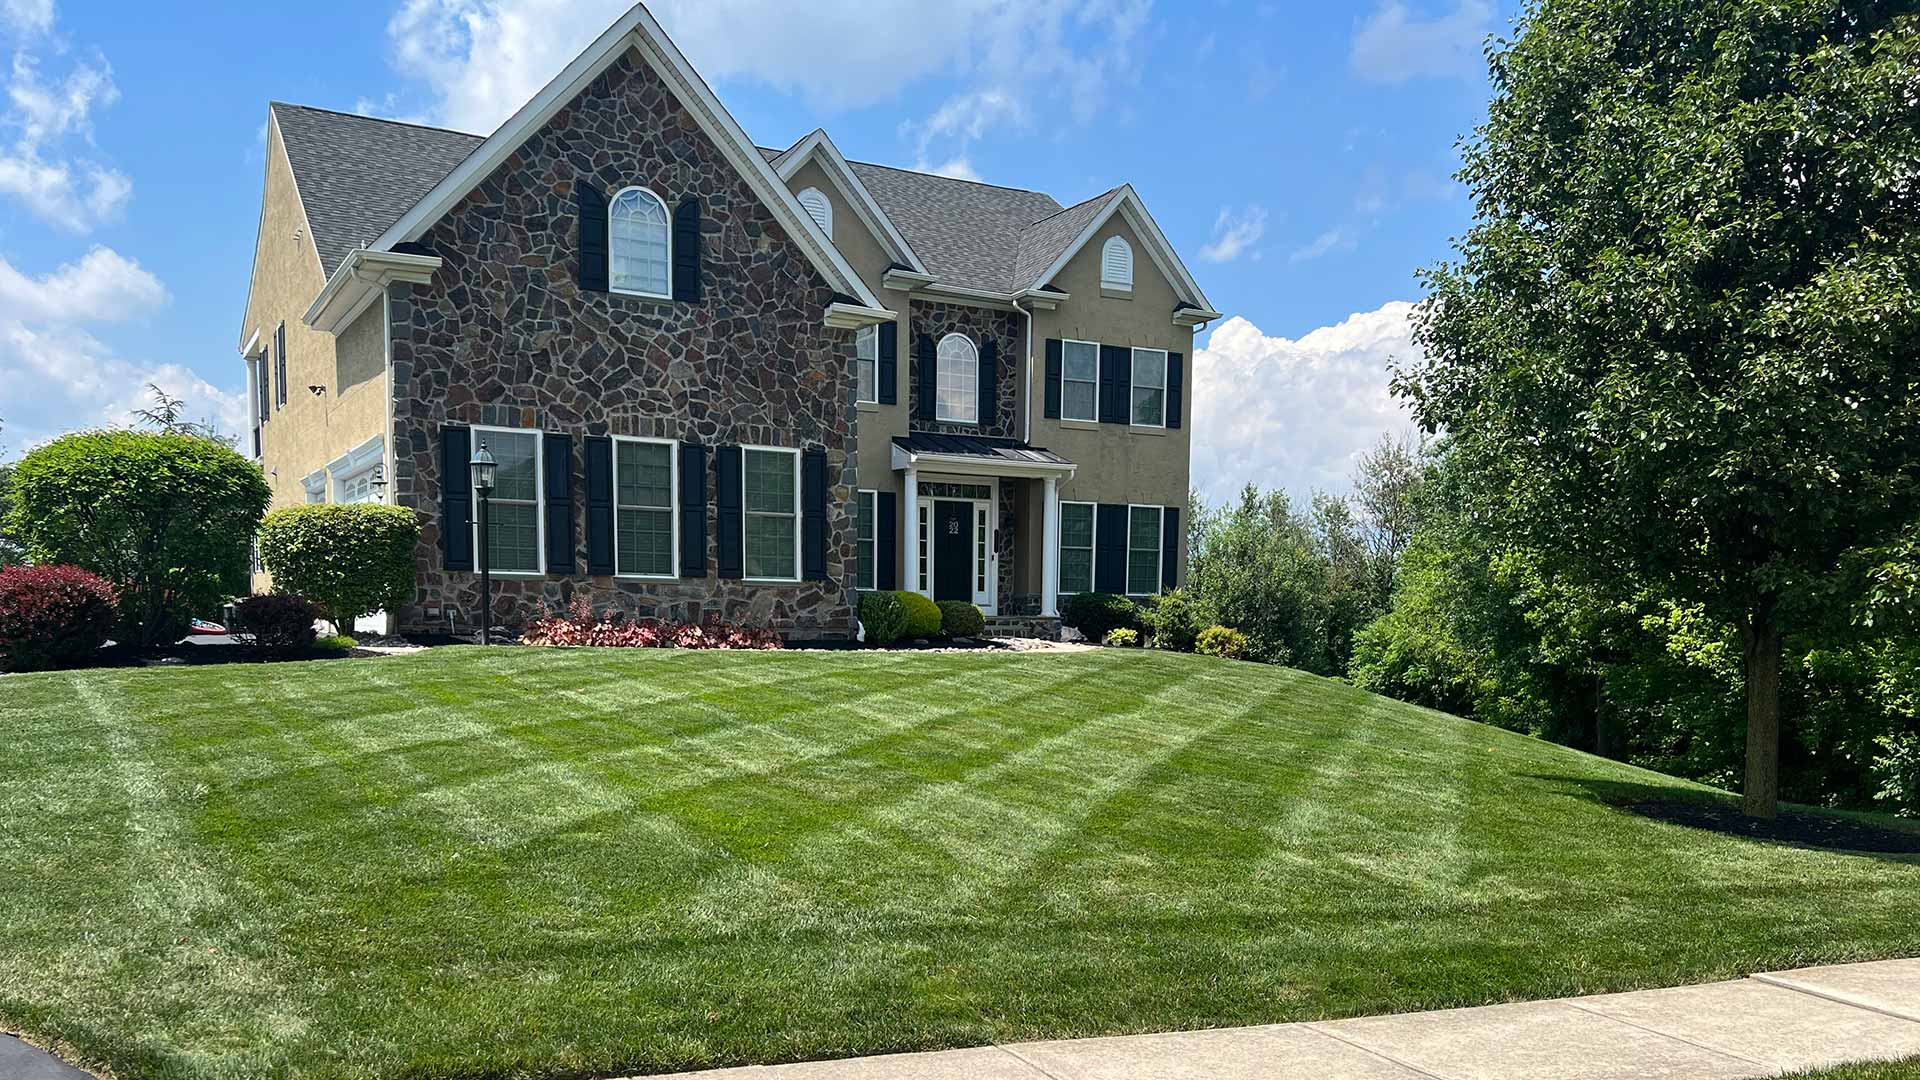 Beautiful natural stone home with gorgeous green lawn grass near Lansdale, PA.